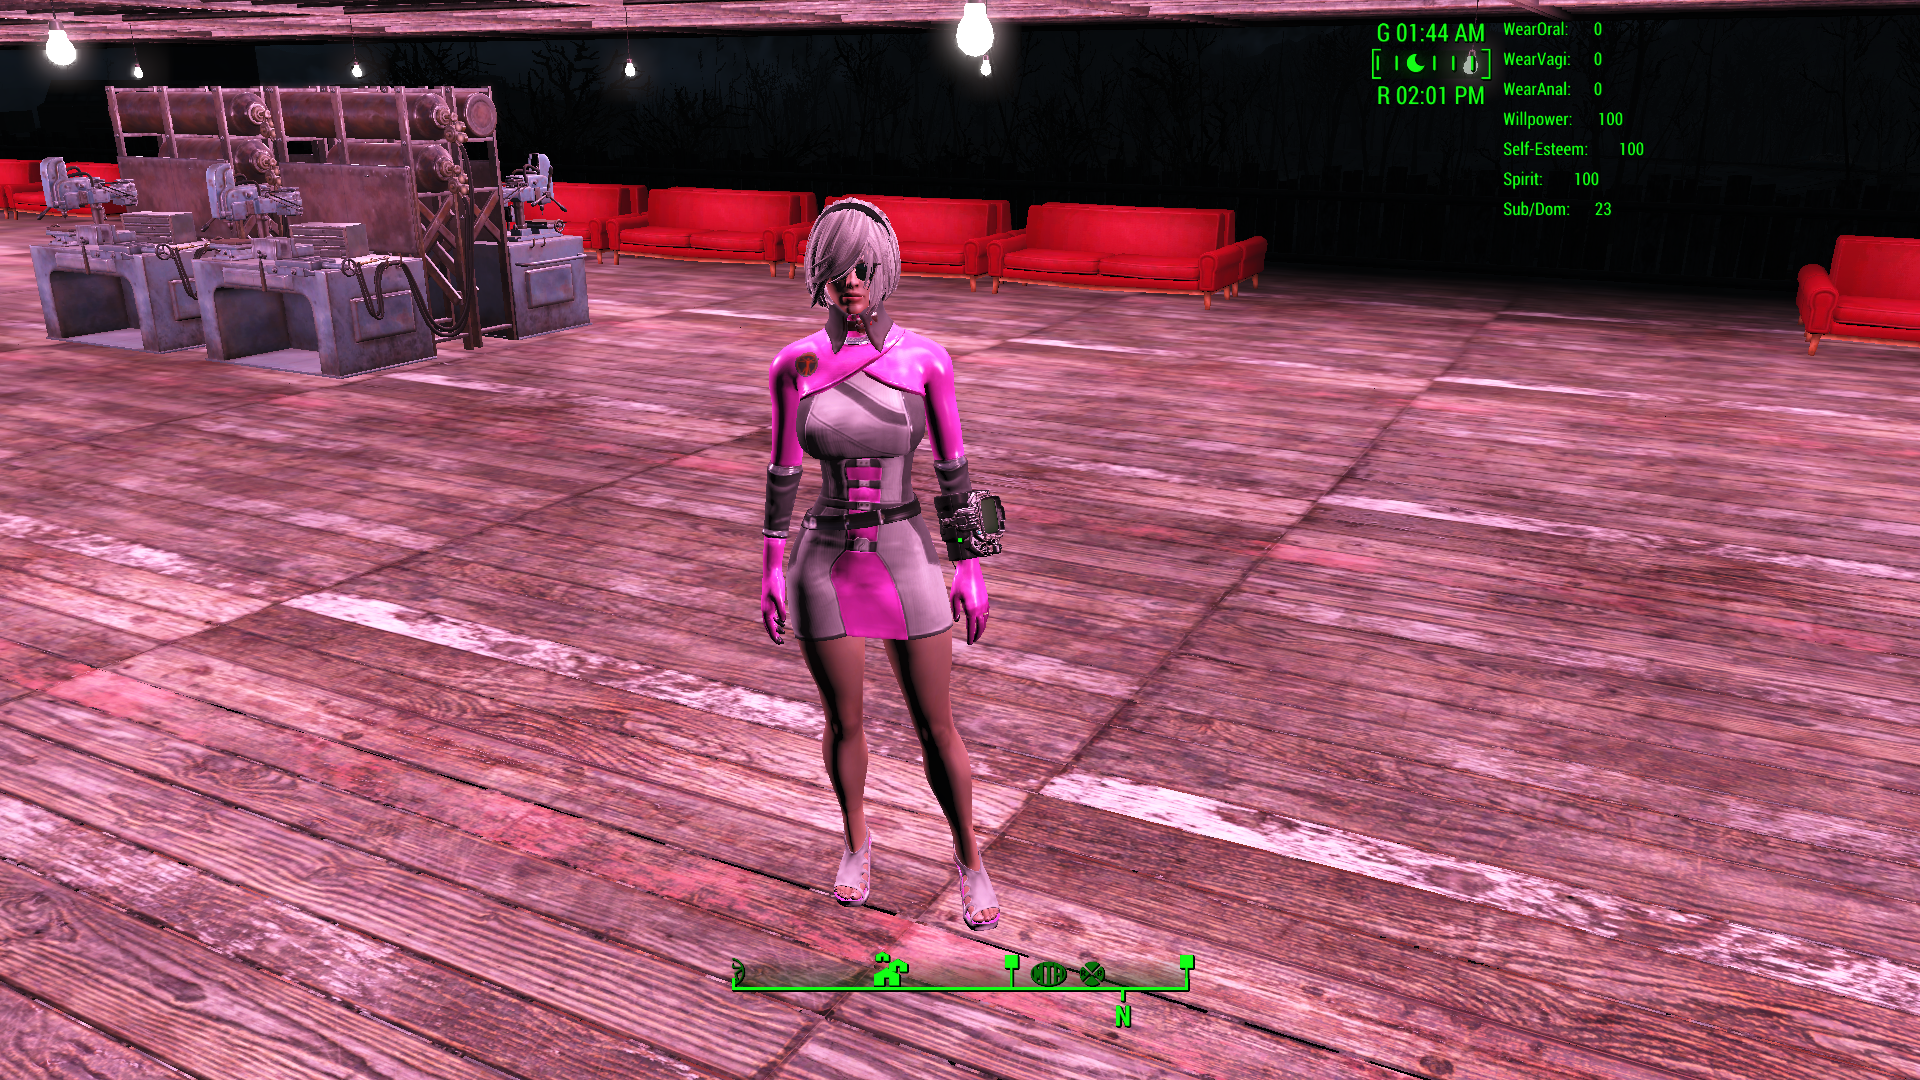 Democracy Dancer Light TheKite's Health Care Division Synth Uniform - NON ADULT VERSION - -  Request & Find - Fallout 4 Non Adult Mods - LoversLab